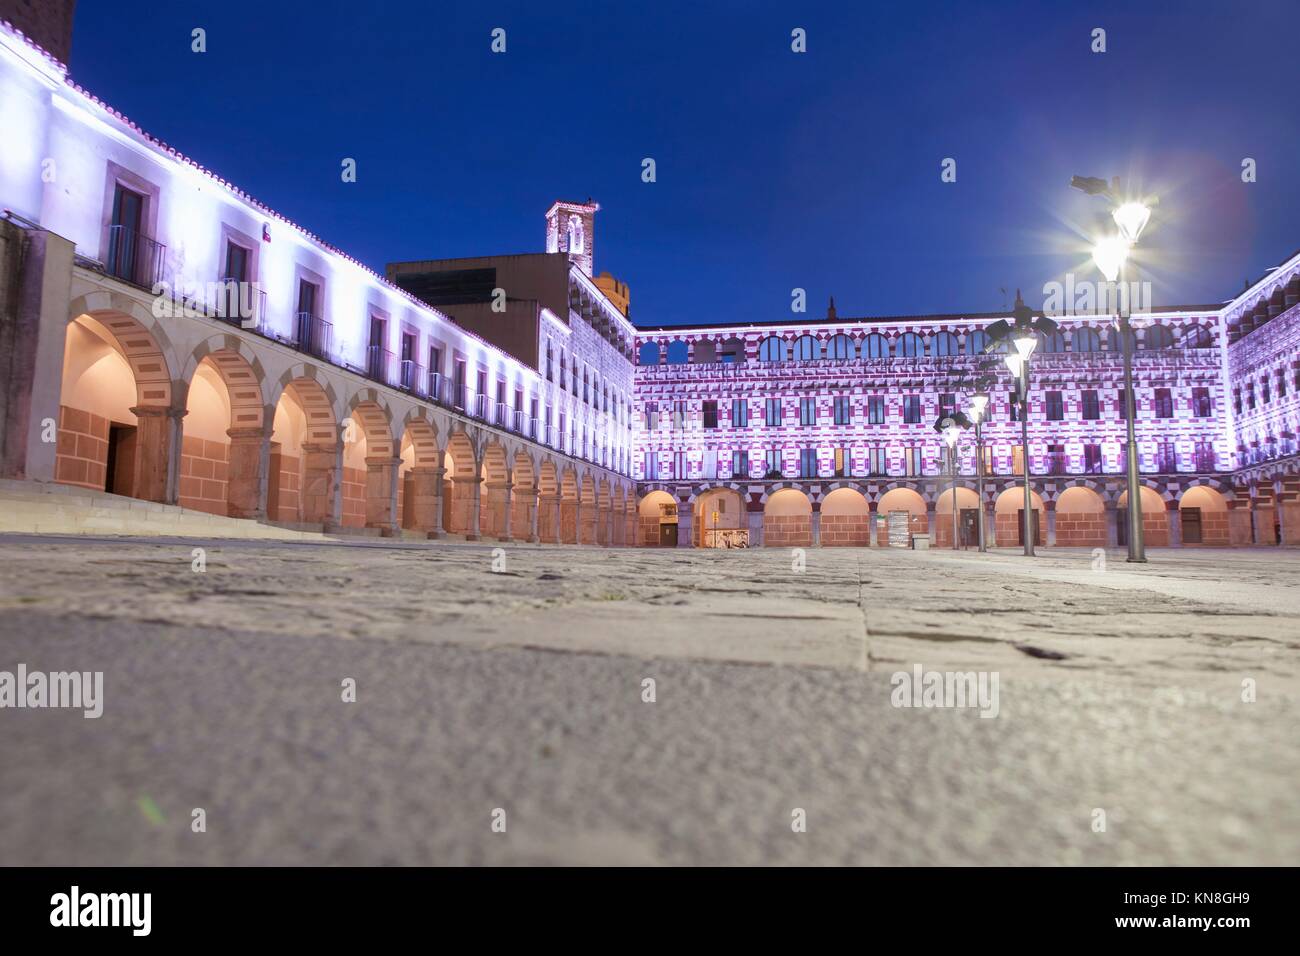 Hight square of Badajoz, illuminated by led lights at twilight. Low angle view from the floor. Stock Photo